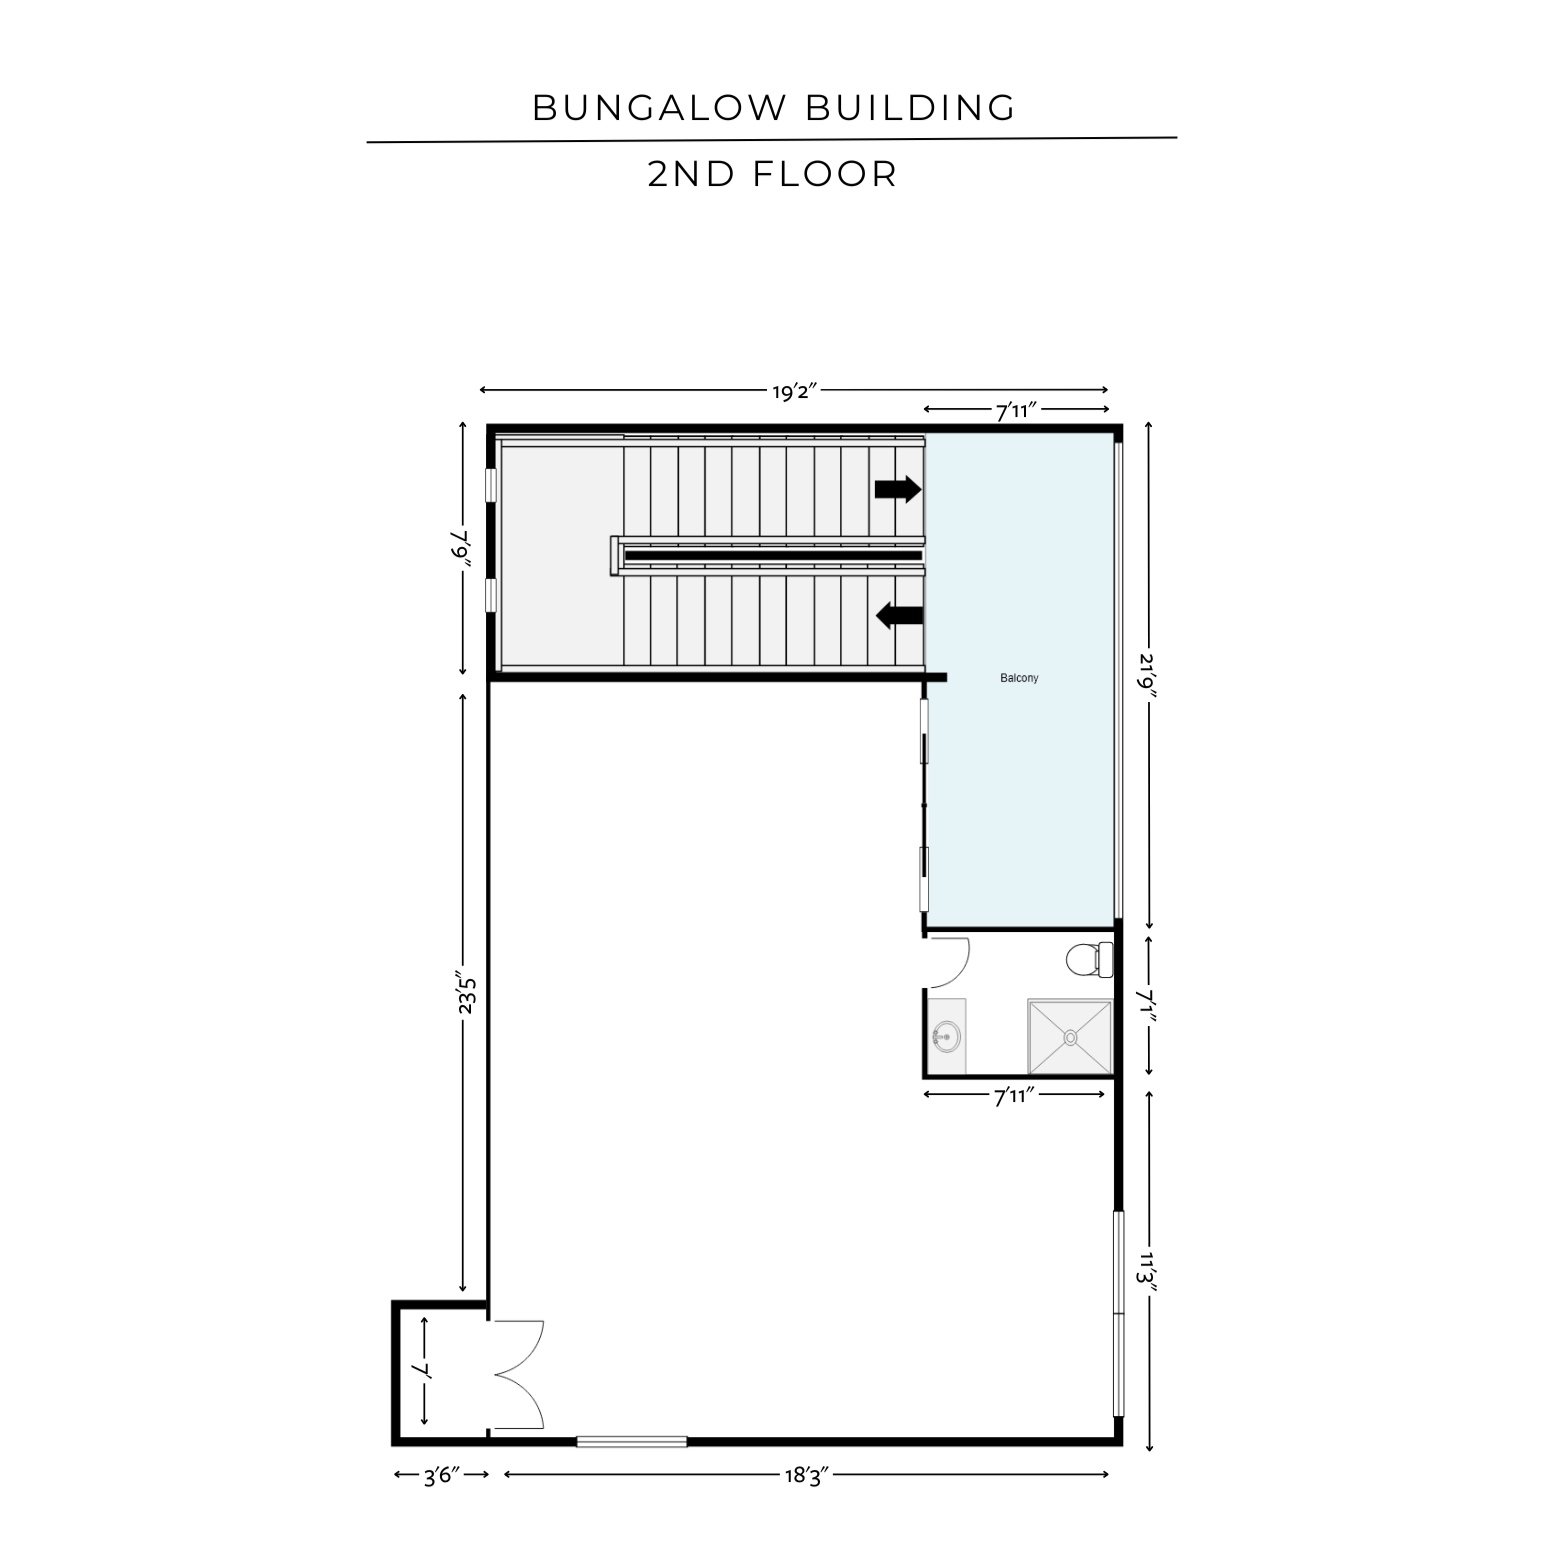 Floor plan with dimensions